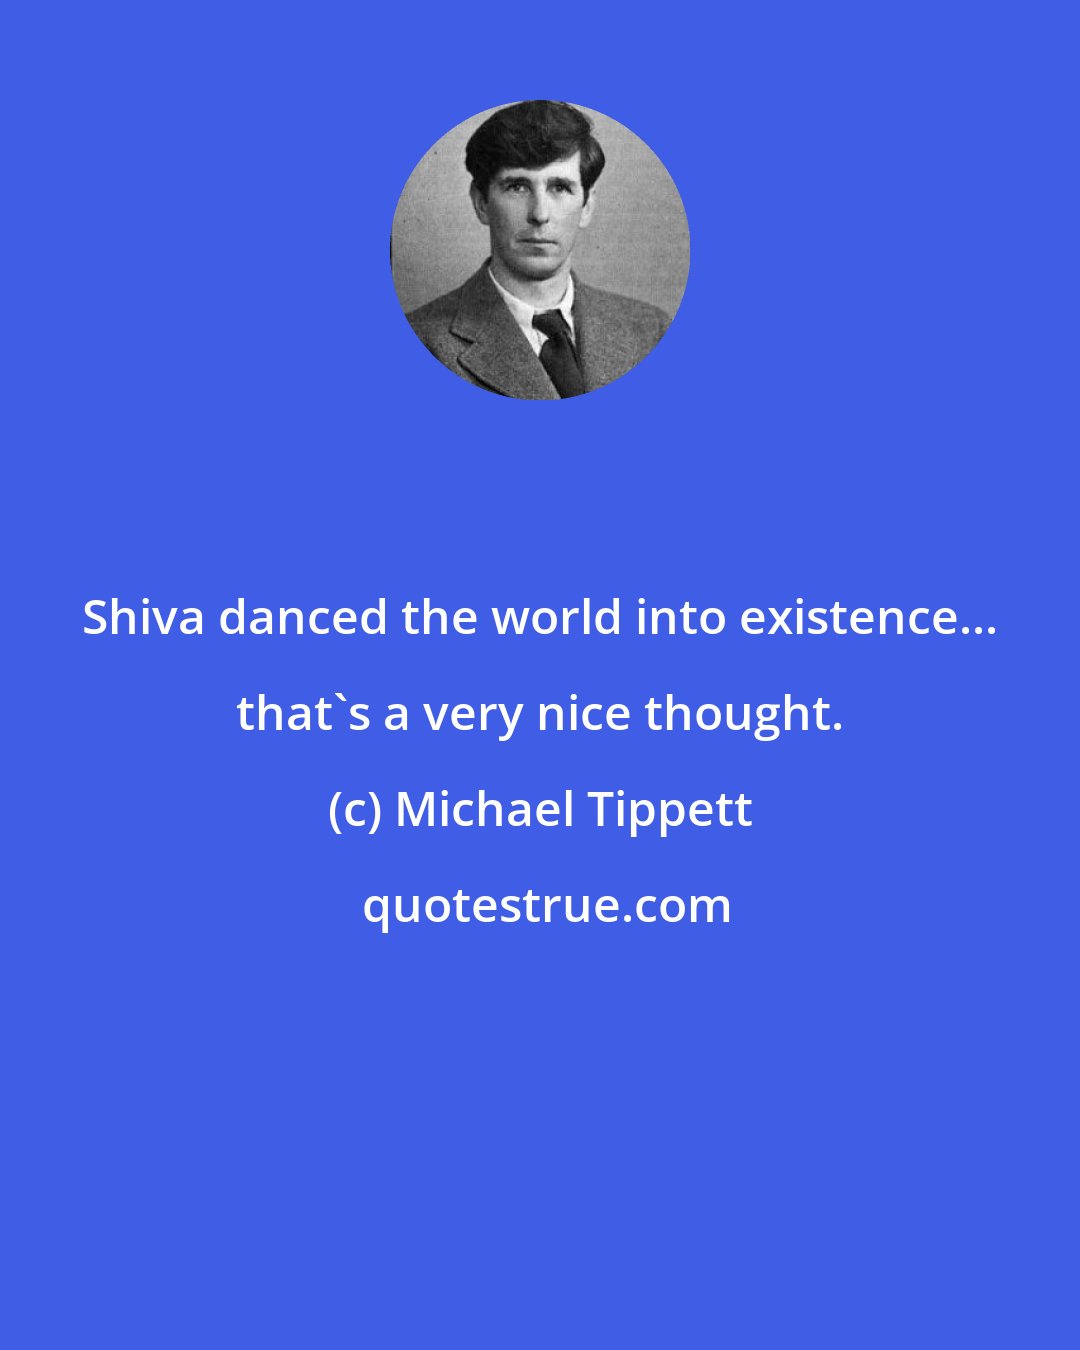 Michael Tippett: Shiva danced the world into existence... that's a very nice thought.